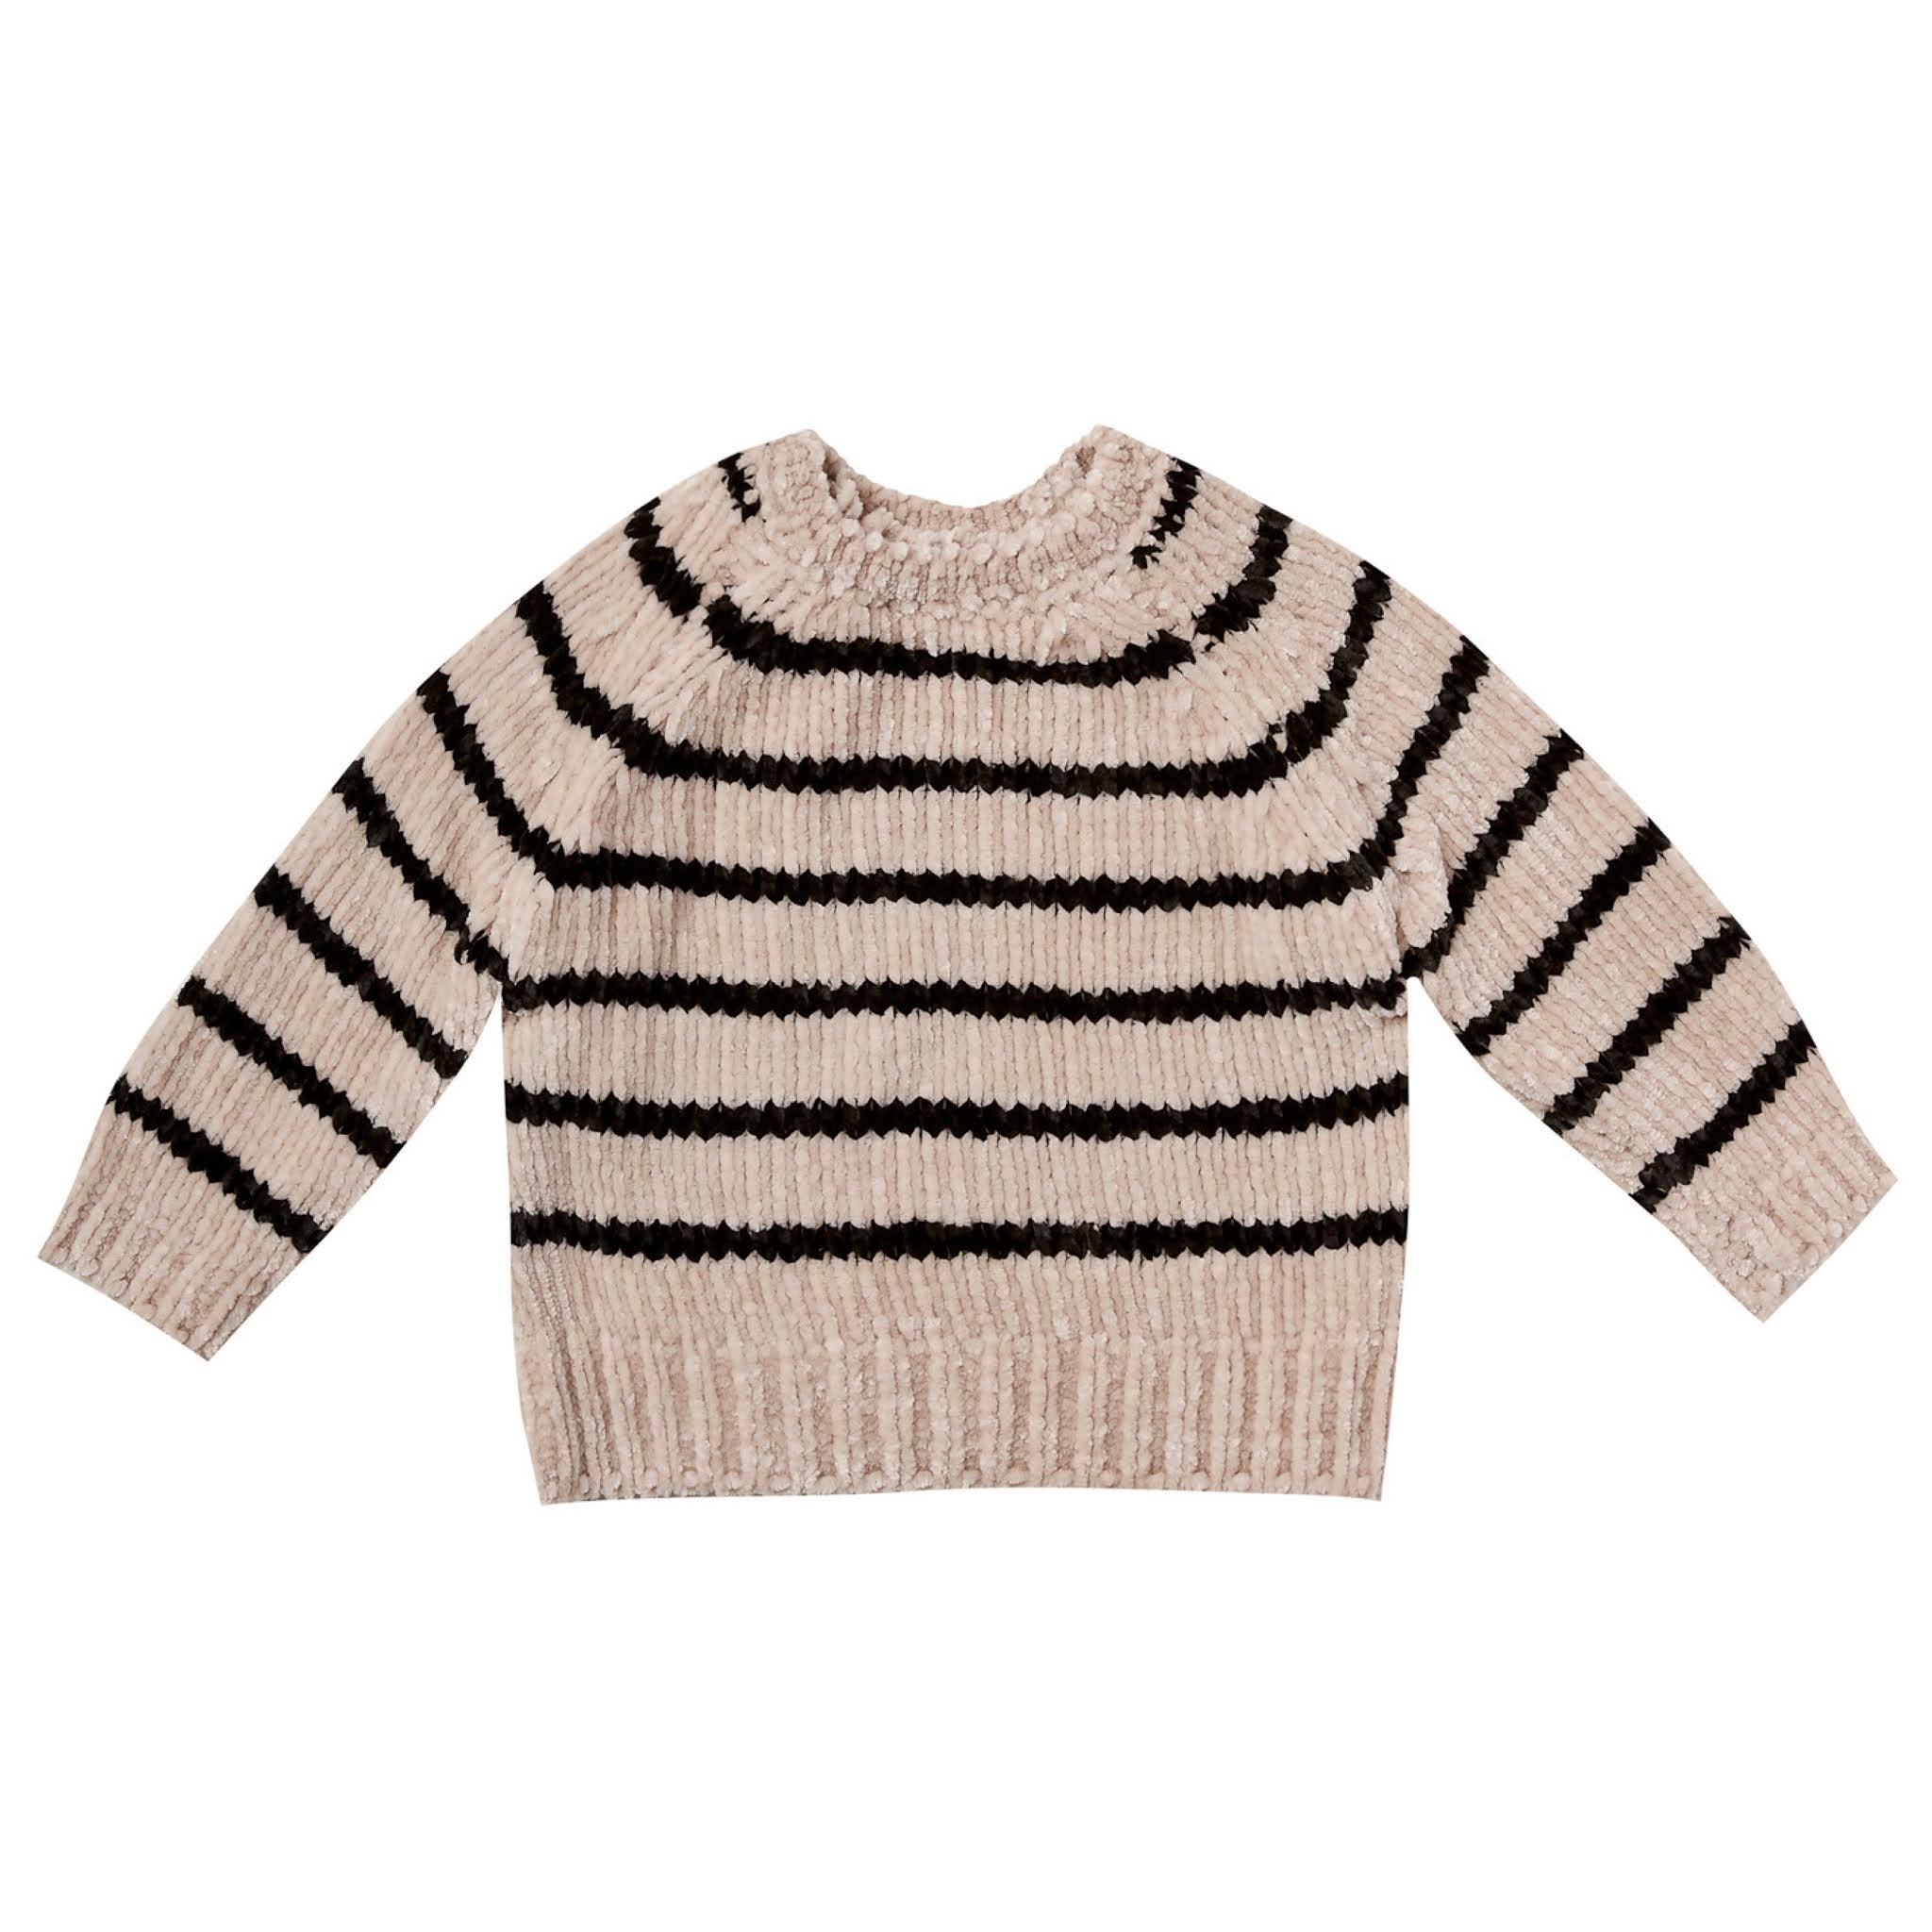 Beige Striped Sweater from Rylee and Cru